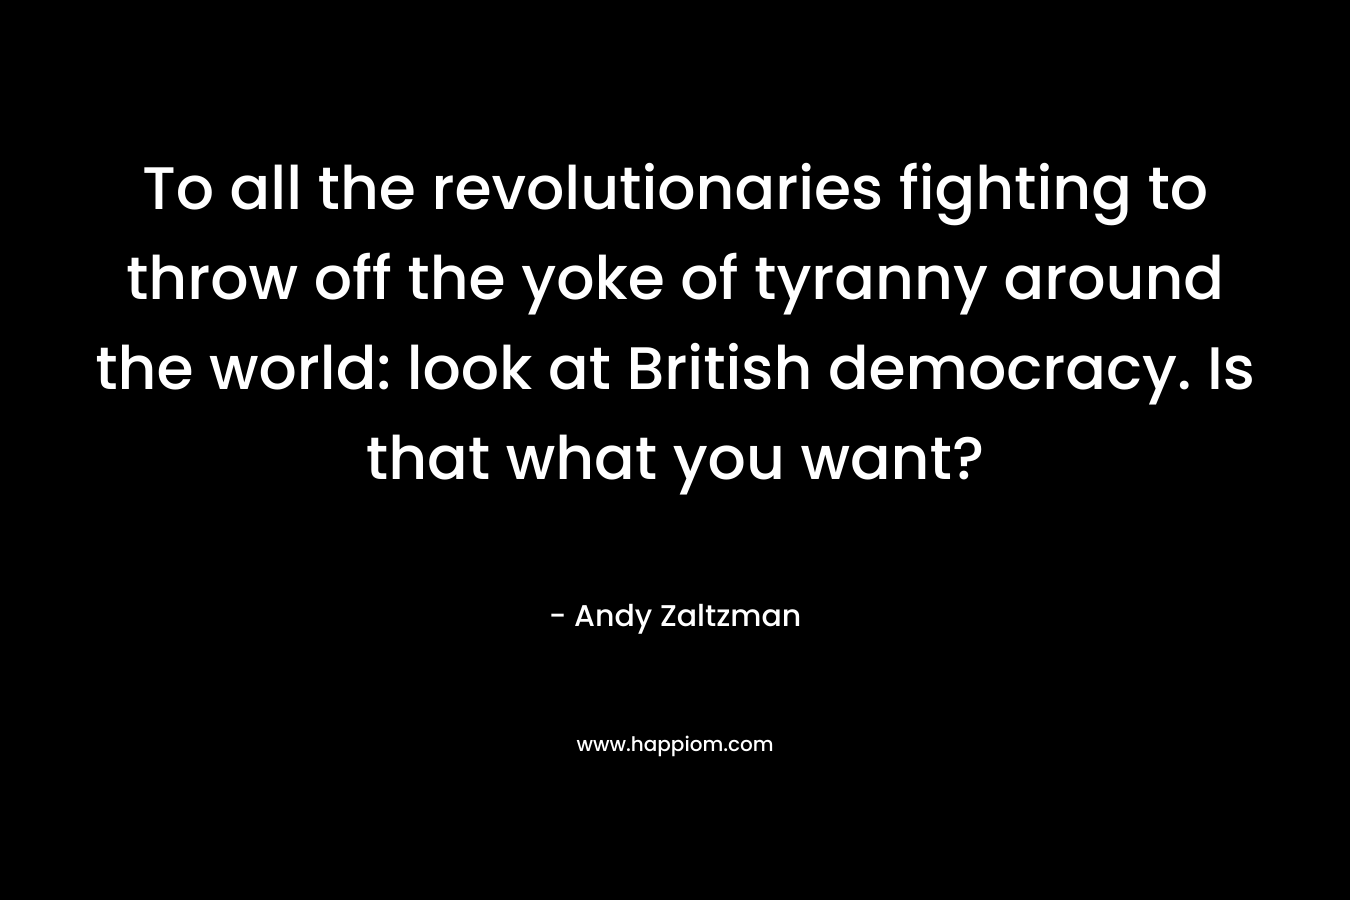 To all the revolutionaries fighting to throw off the yoke of tyranny around the world: look at British democracy. Is that what you want? – Andy Zaltzman